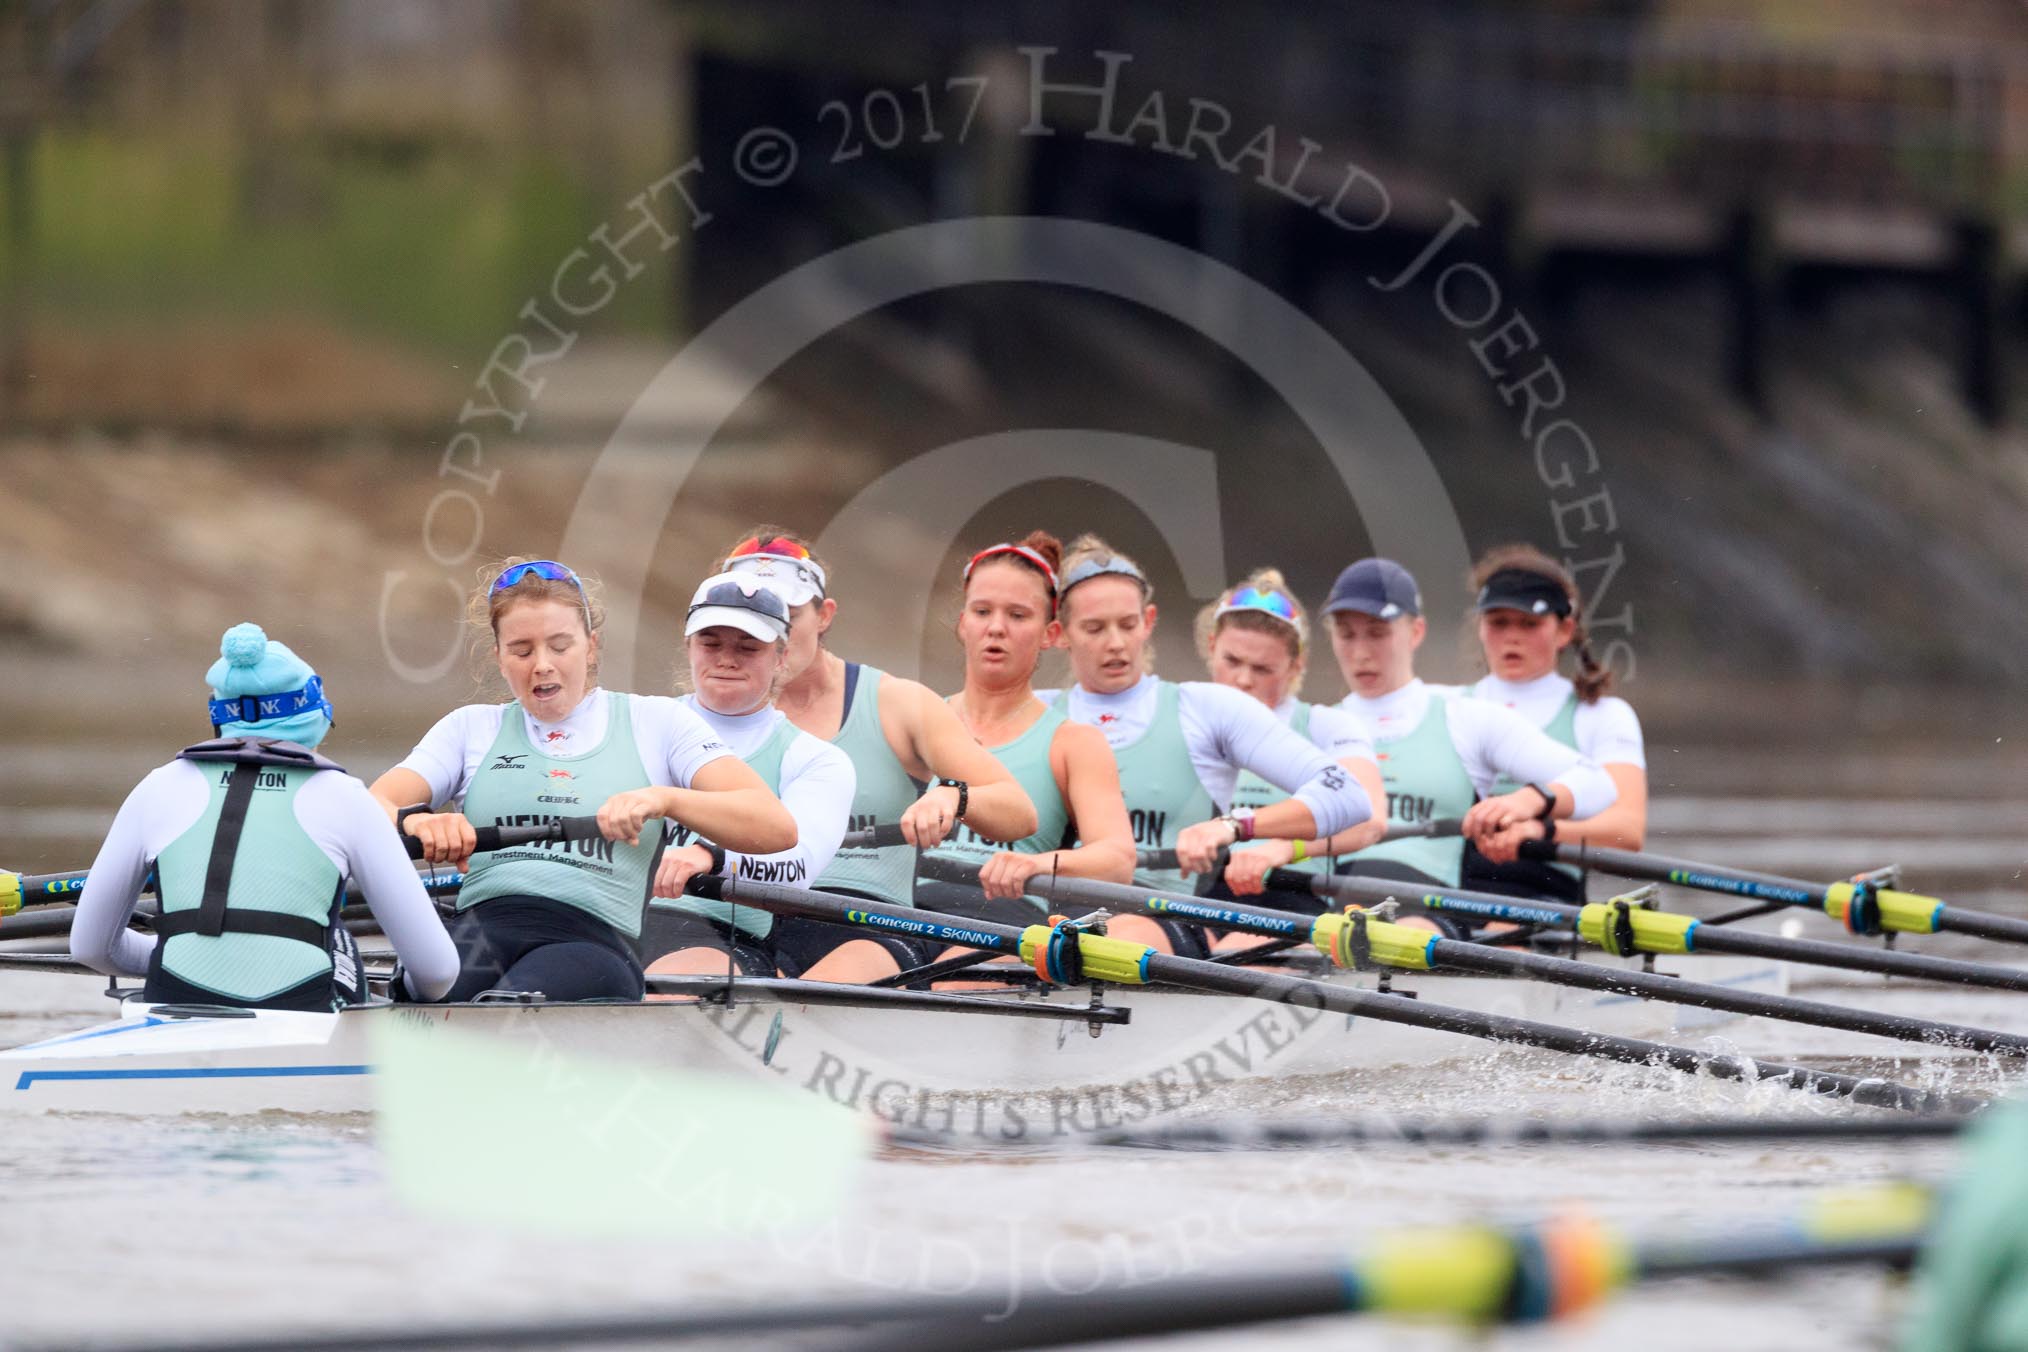 The Boat Race season 2018 - Women's Boat Race Trial Eights (CUWBC, Cambridge): Expecto Patronum:  Cox-Sophie Shapter, stroke-Alice White,  7-Abigail Parker, 6-Thea Zabell, 5-Kelsey Barolak, 4-Laura Foster, 3-Sally O Brien, 2-Millie Perrin, bow-Eve Caroe.
River Thames between Putney Bridge and Mortlake,
London SW15,

United Kingdom,
on 05 December 2017 at 12:58, image #152